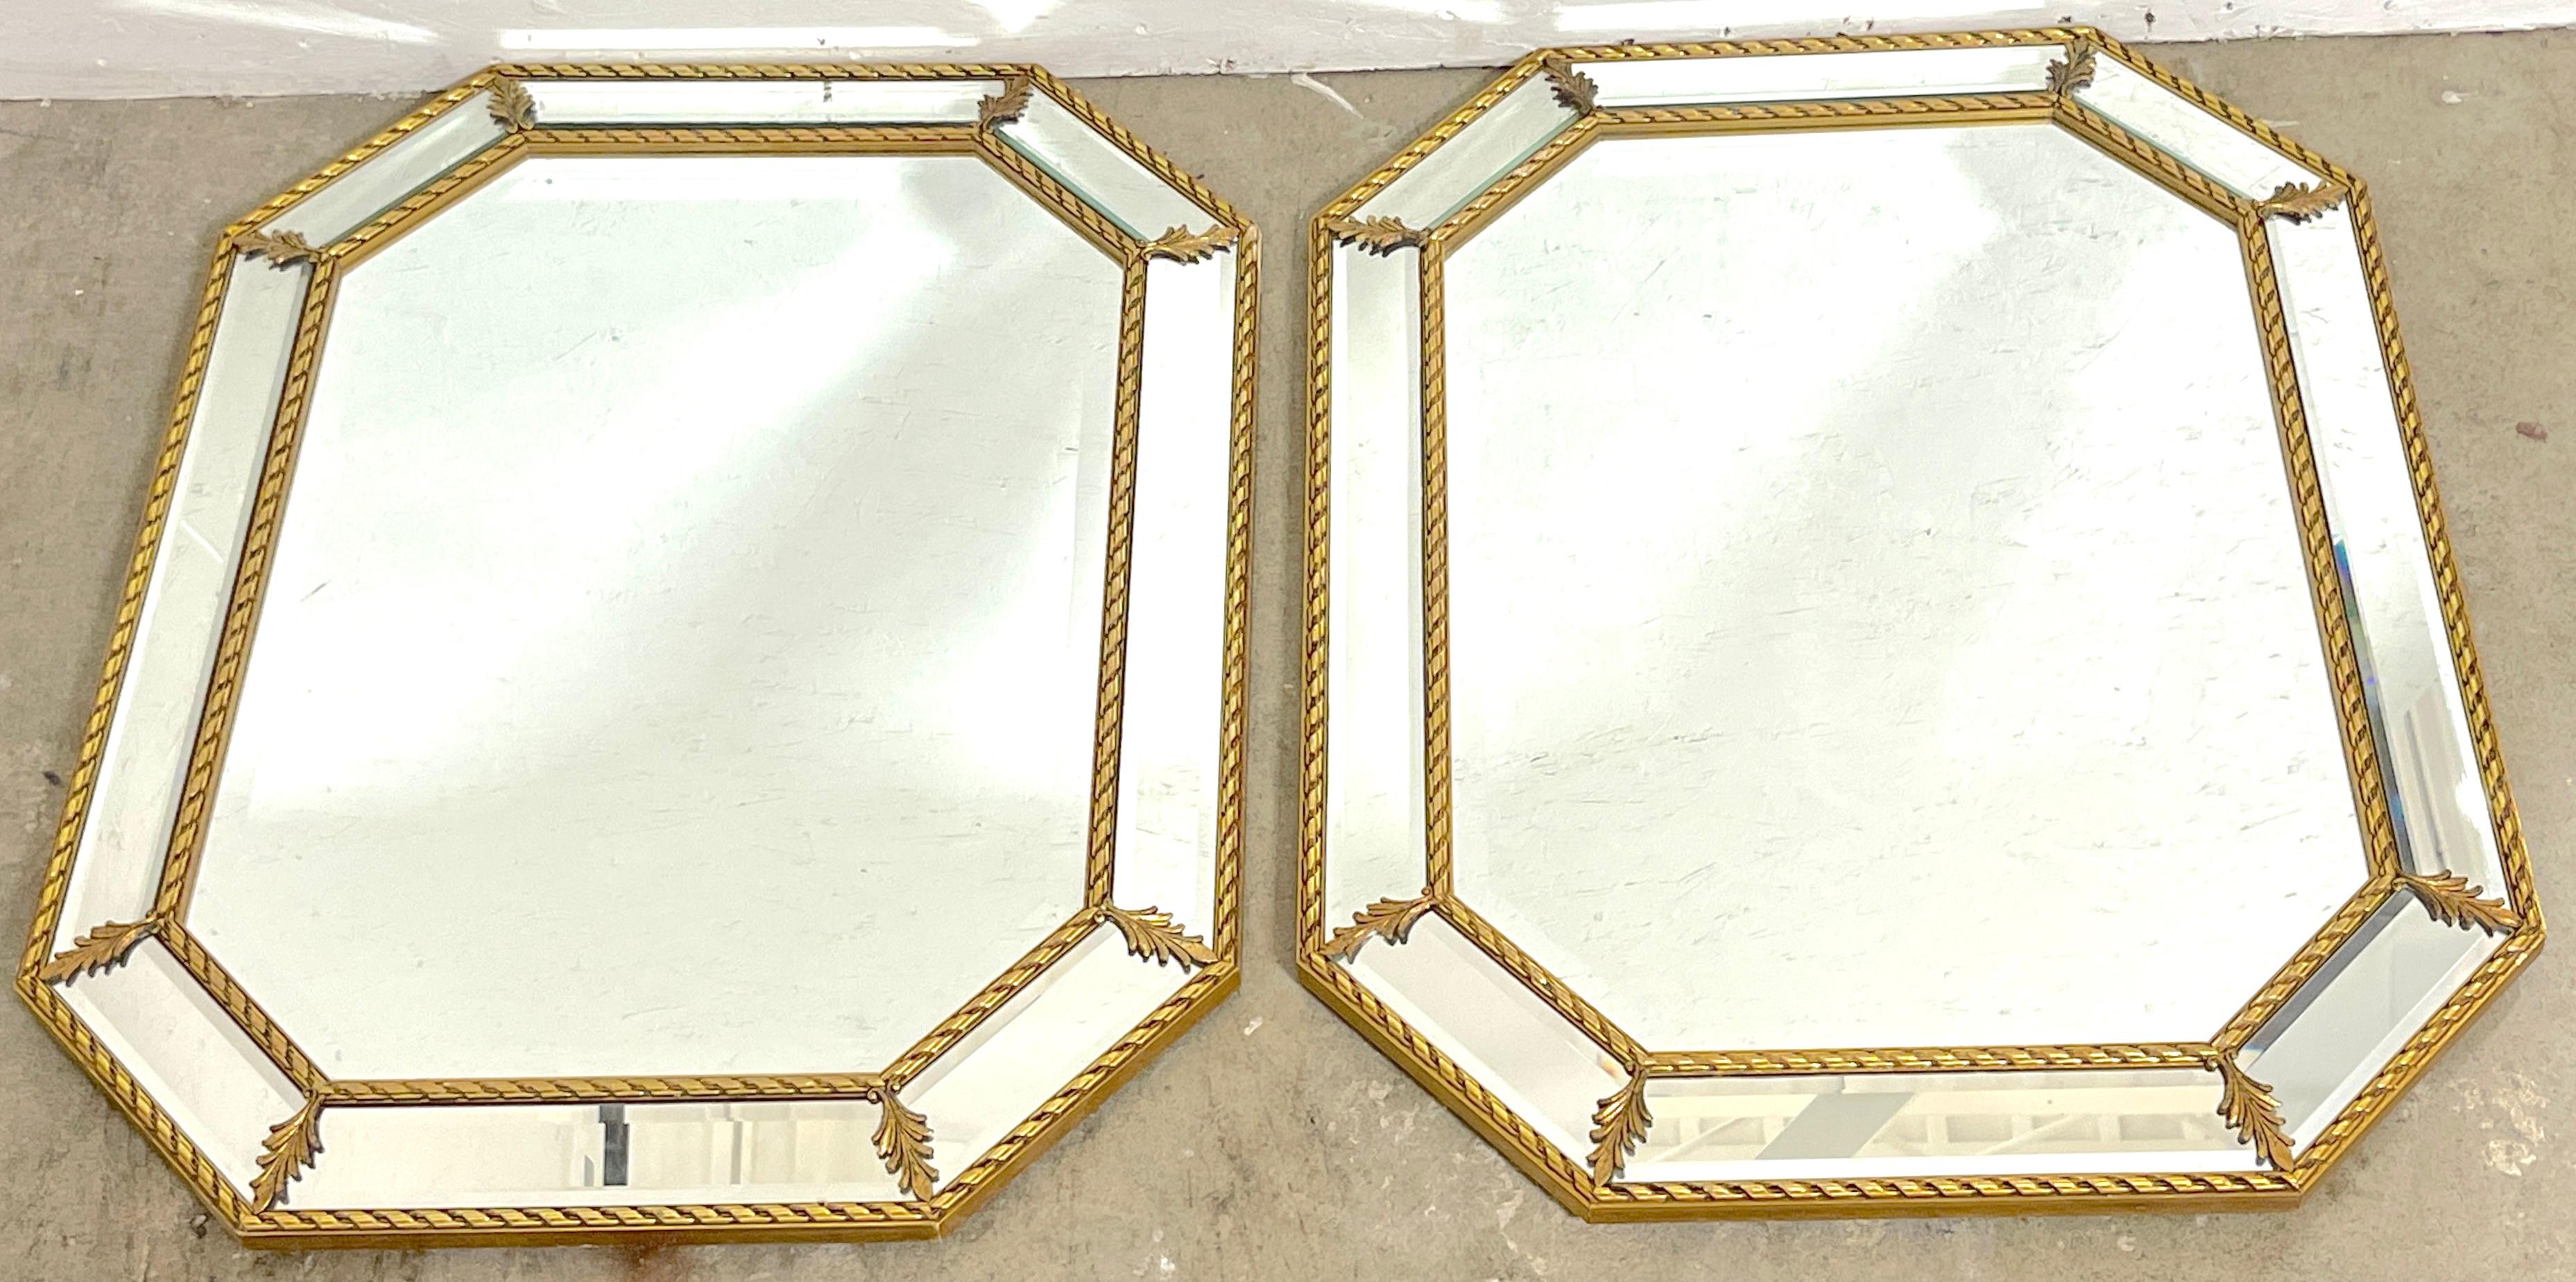 Pair of Italian Giltwood Neoclassical Beveled Mirrors  In Good Condition For Sale In West Palm Beach, FL